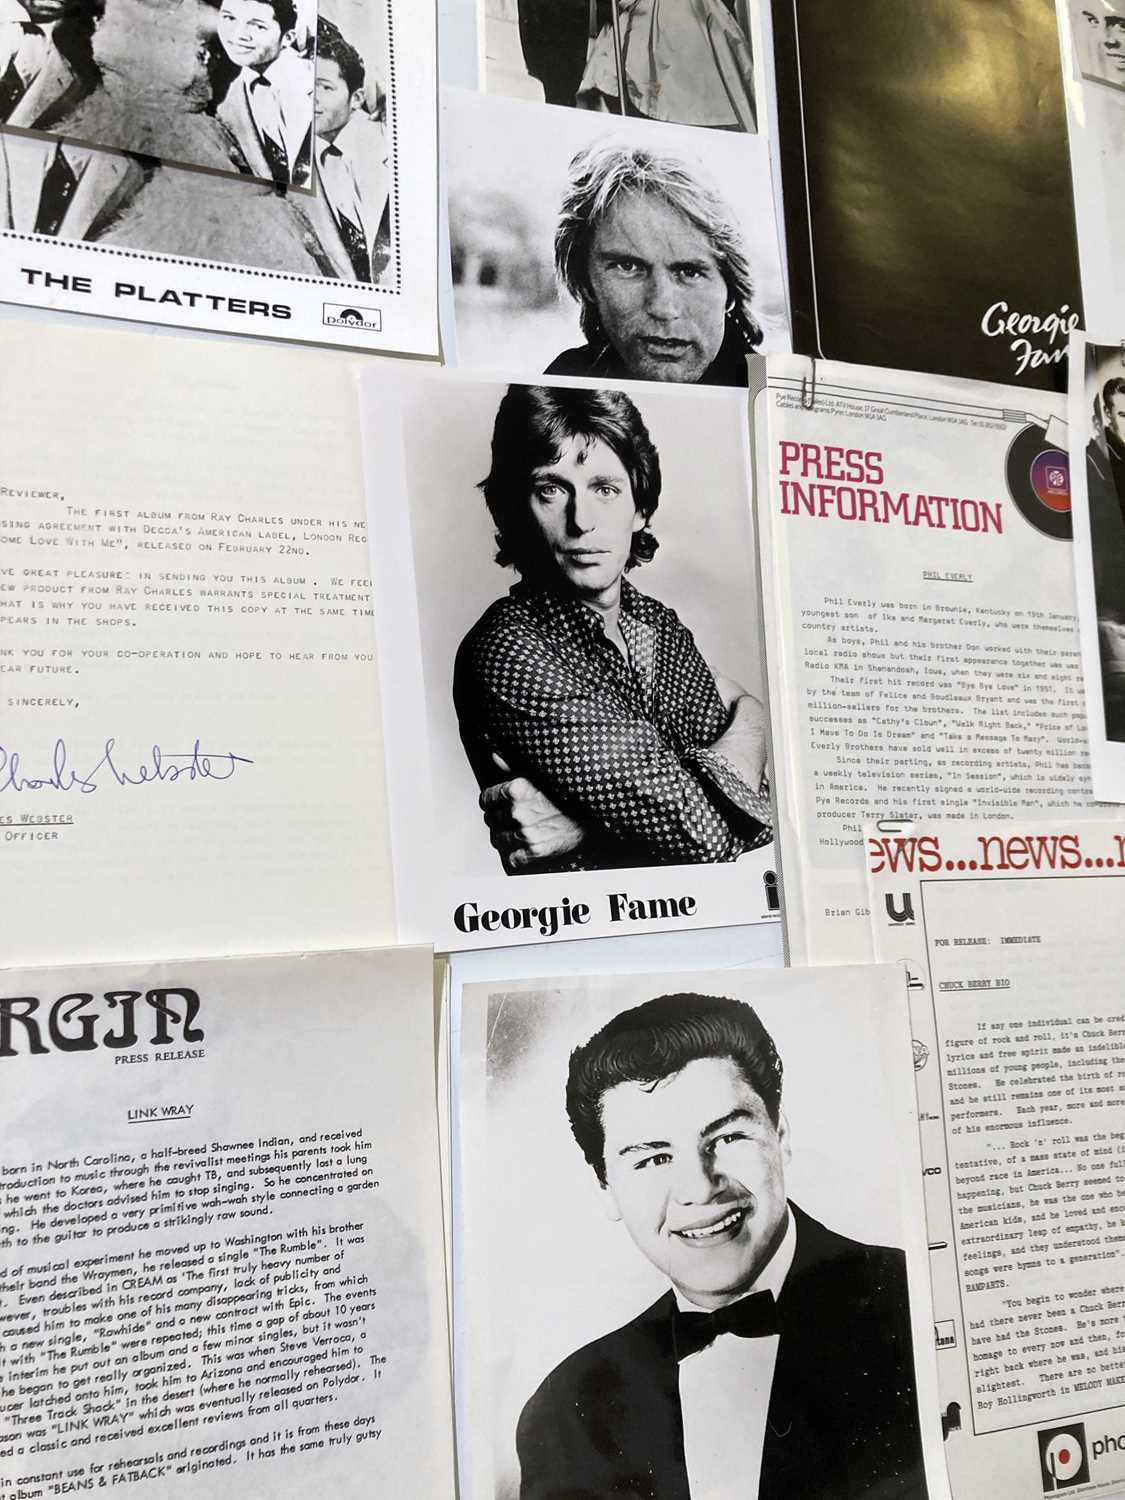 PRESS KIT ARCHIVE - ROCK N ROLL ARTISTS. - Image 2 of 5